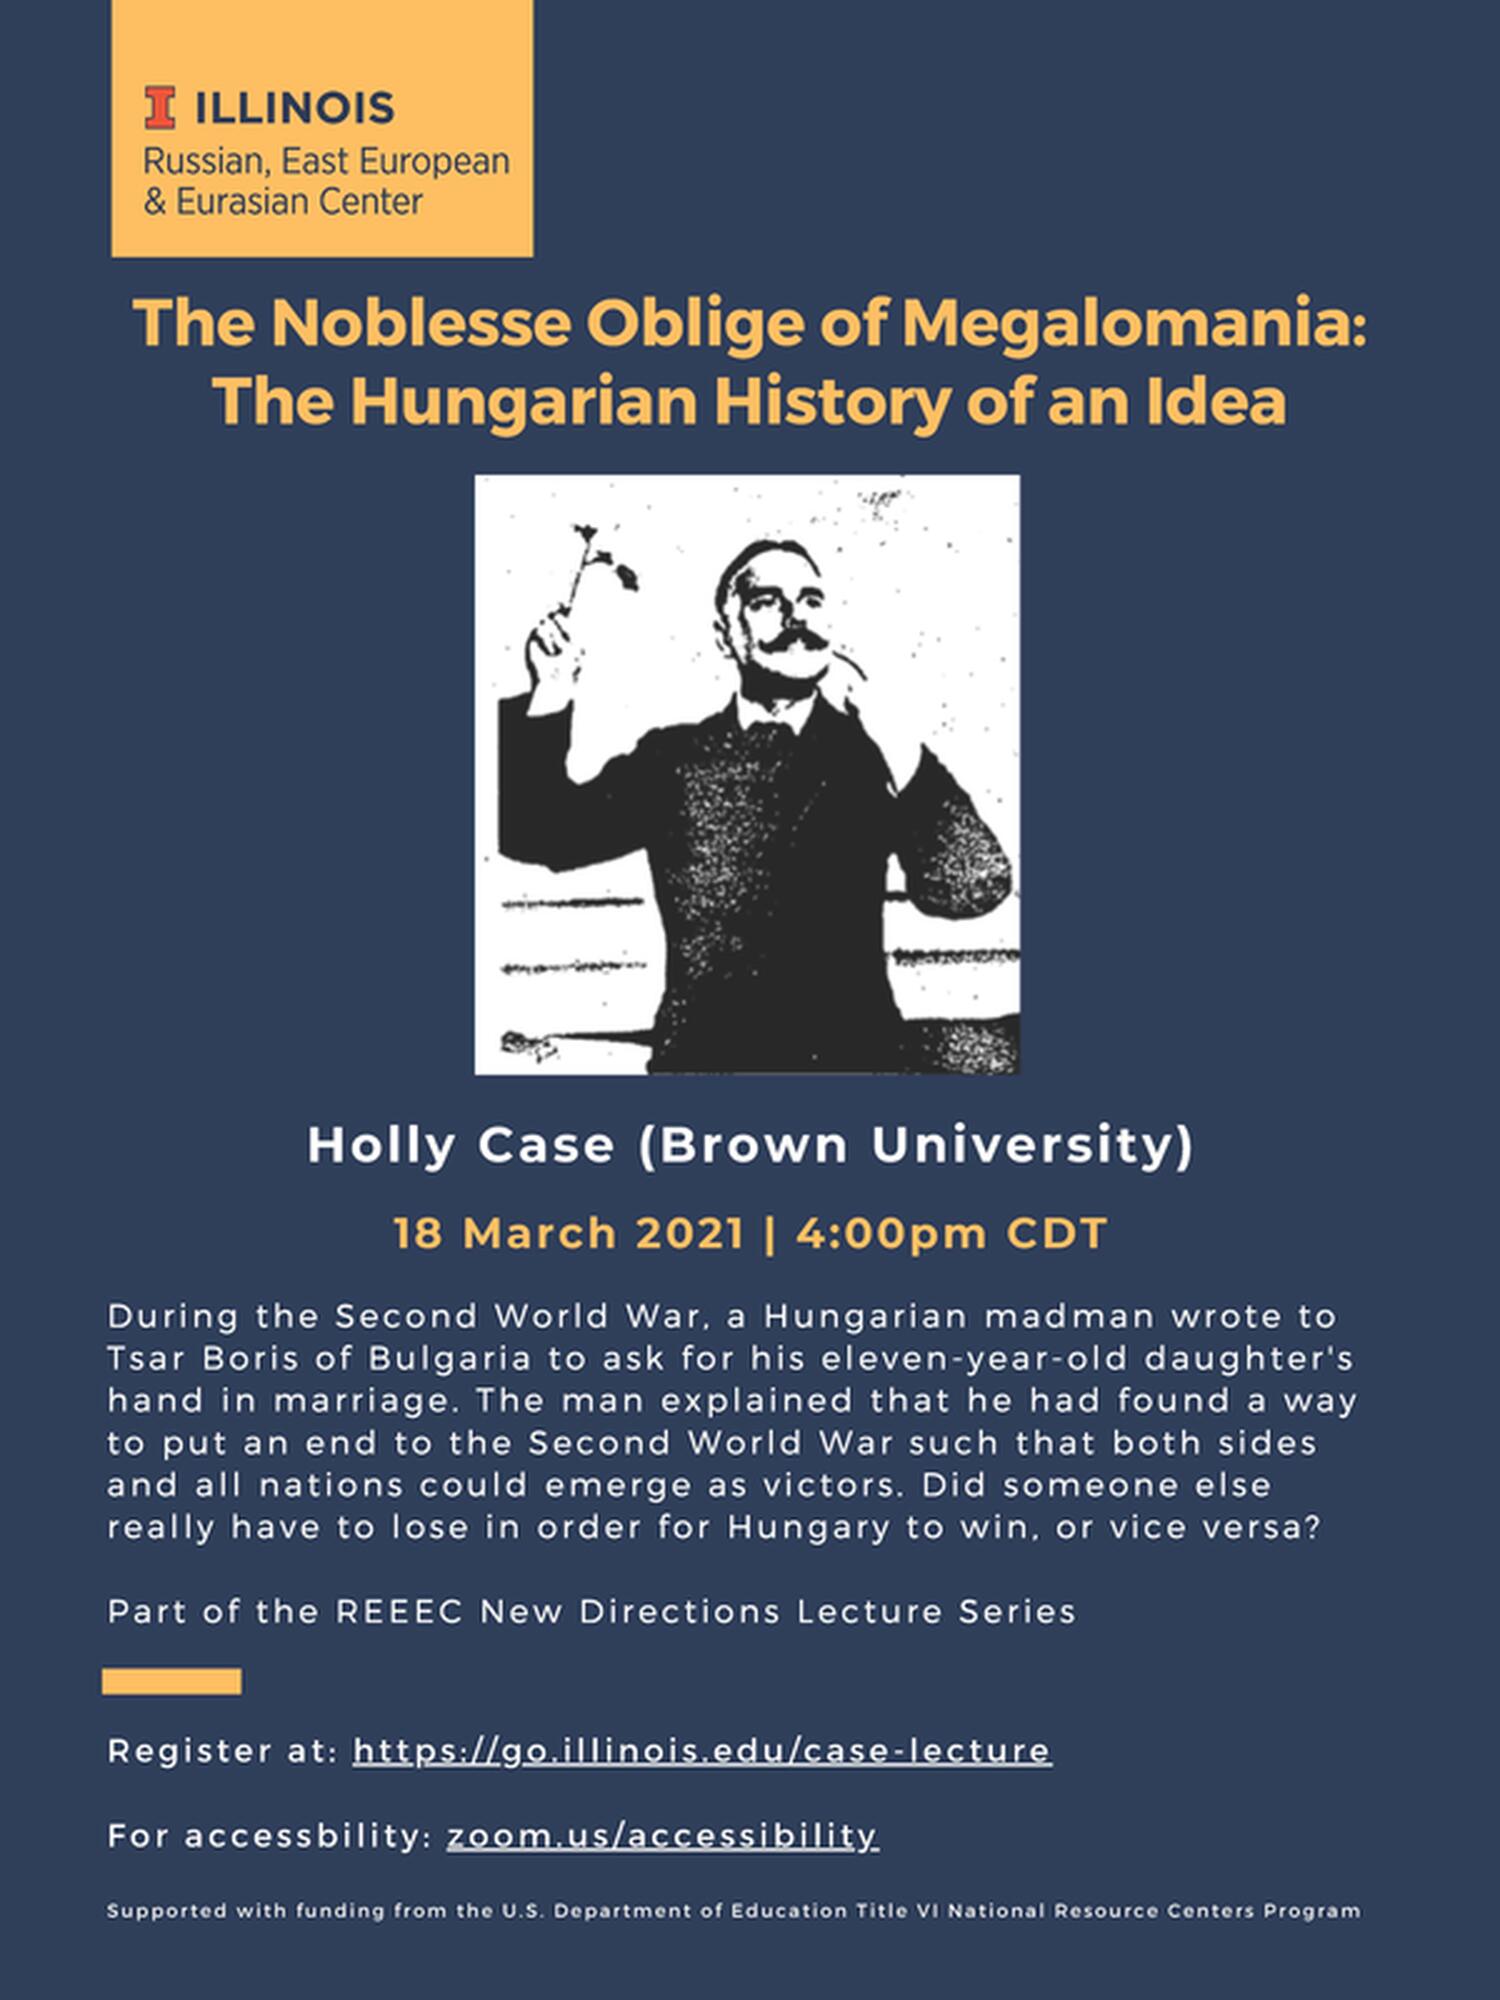 The Noblesse Oblige of Megalomania Event Flyer